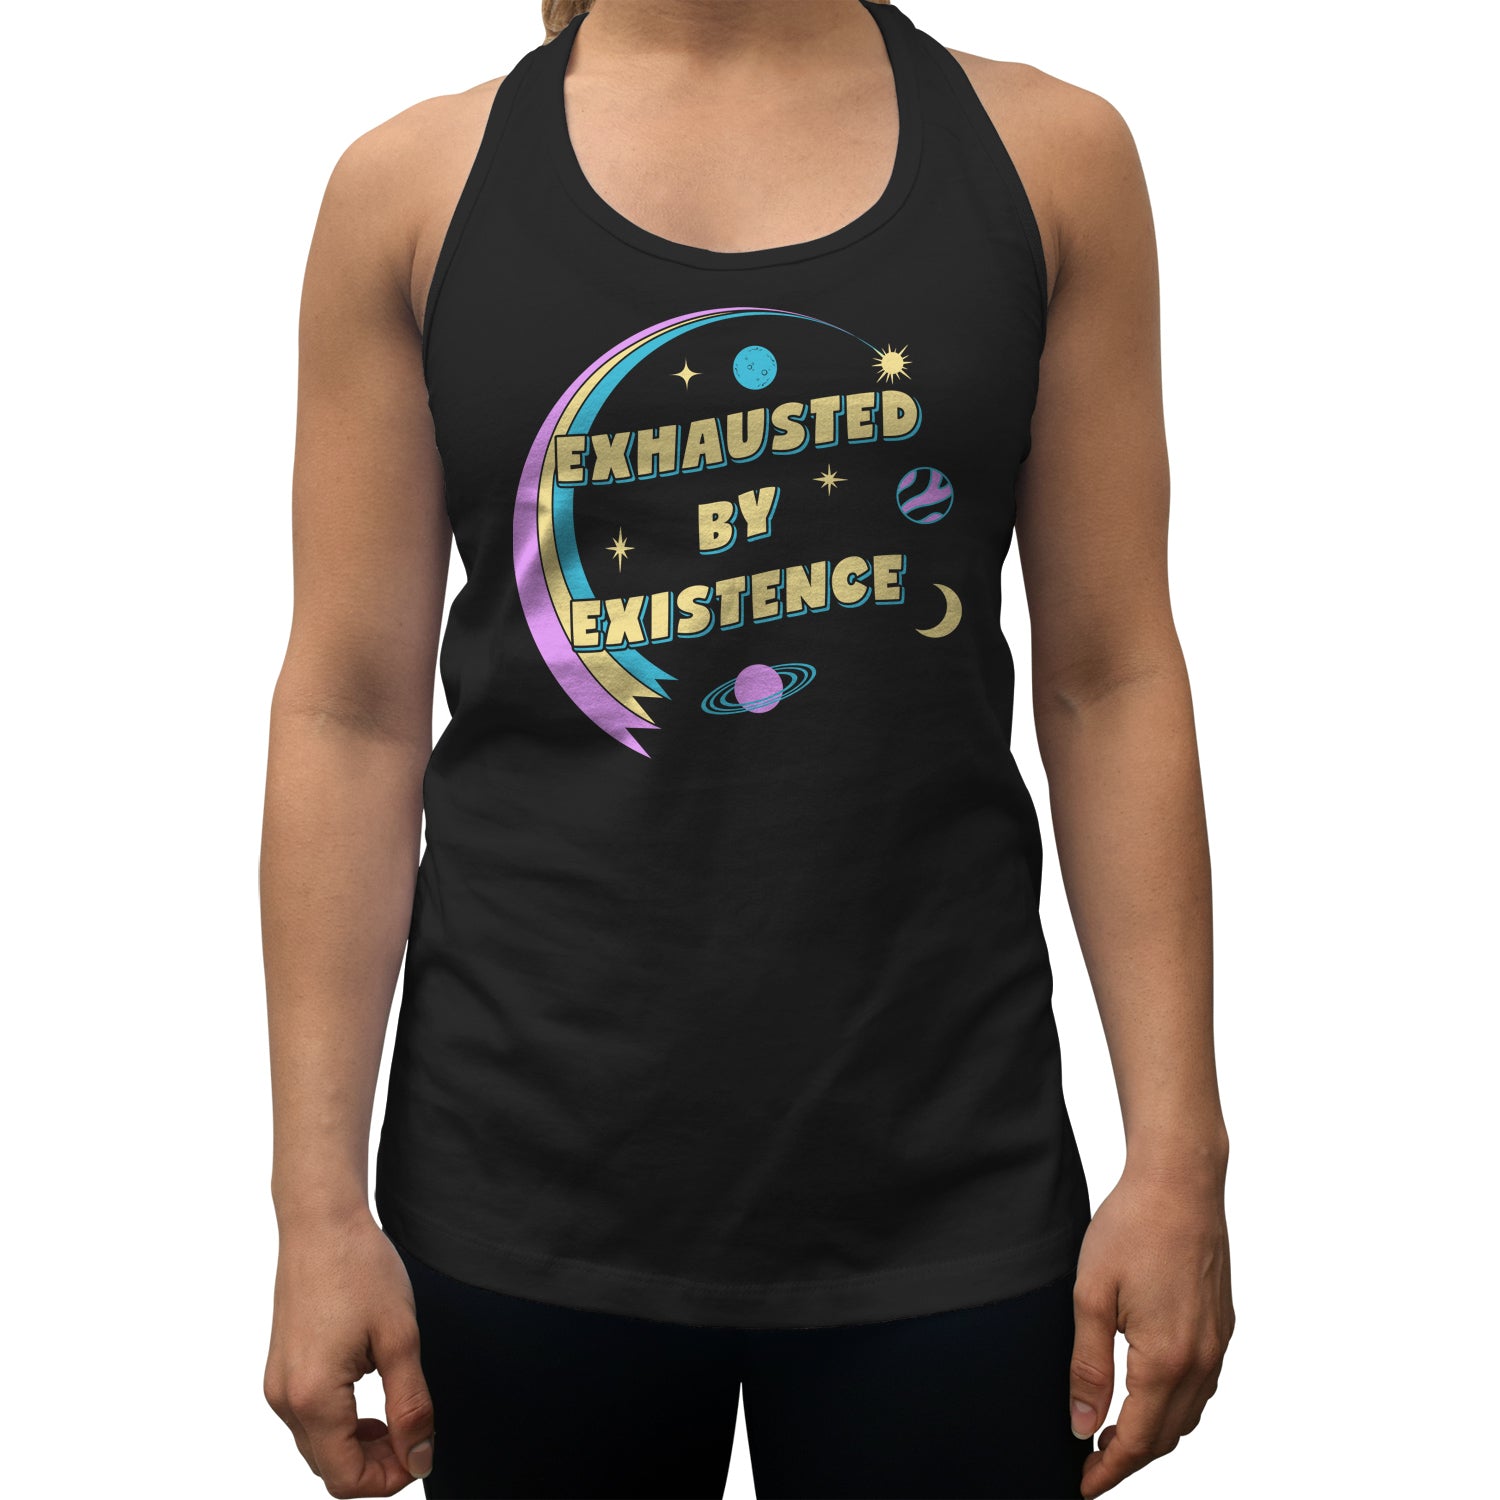 Women's Exhausted By Existence Racerback Tank Top